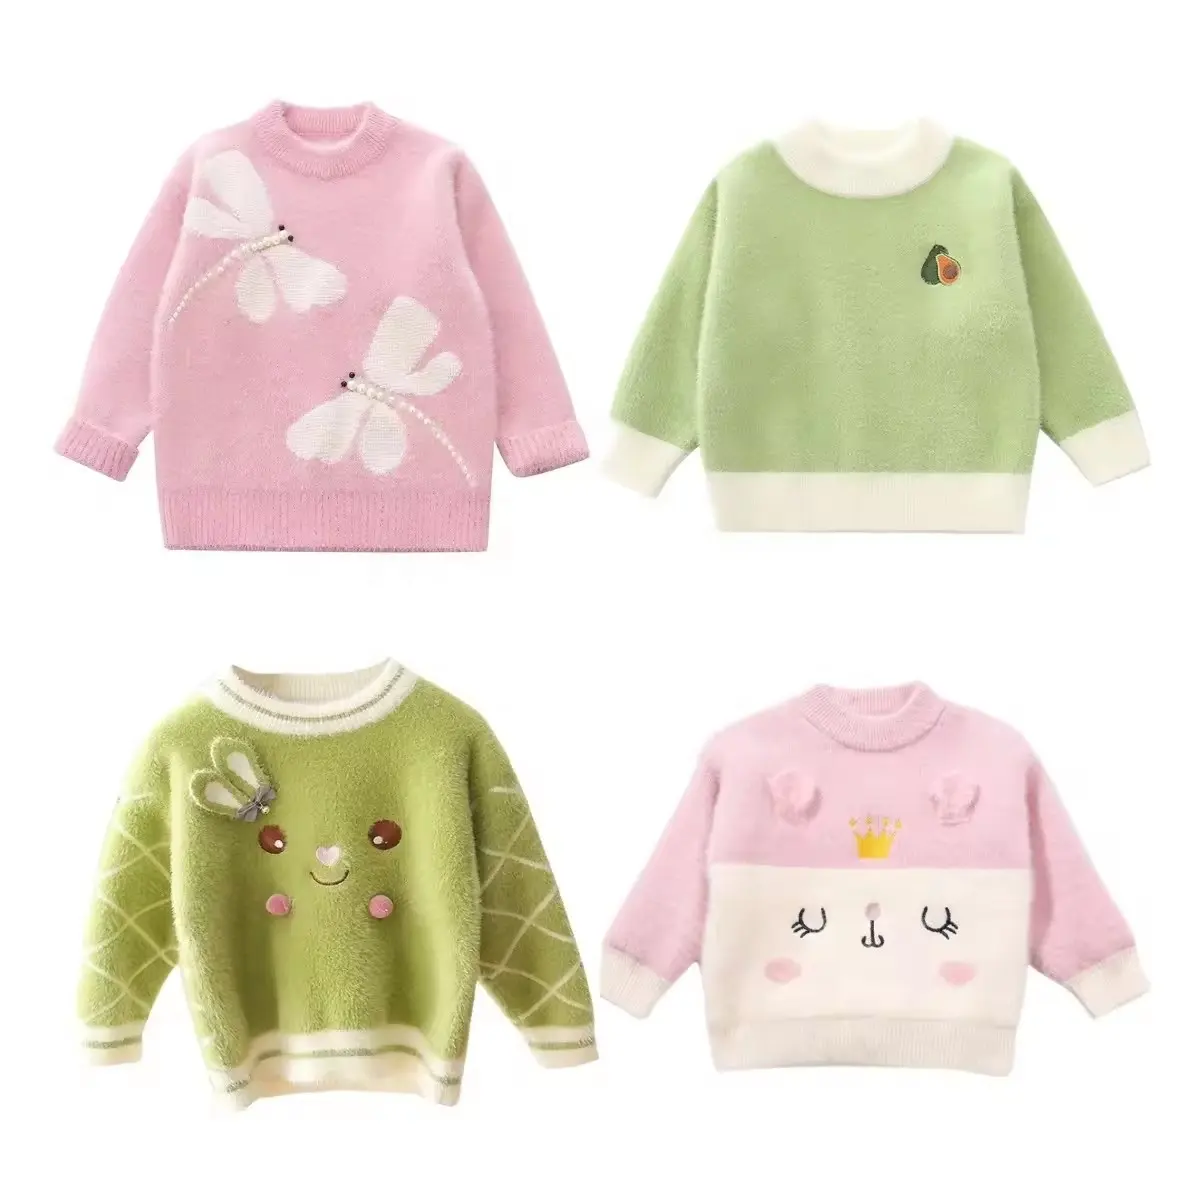 Long Sleeve Baby Sweatshirts - Winter Baby Girl & Boy Pullover Sweater Warm Long Sleeve Tops for Infants & Toddlers